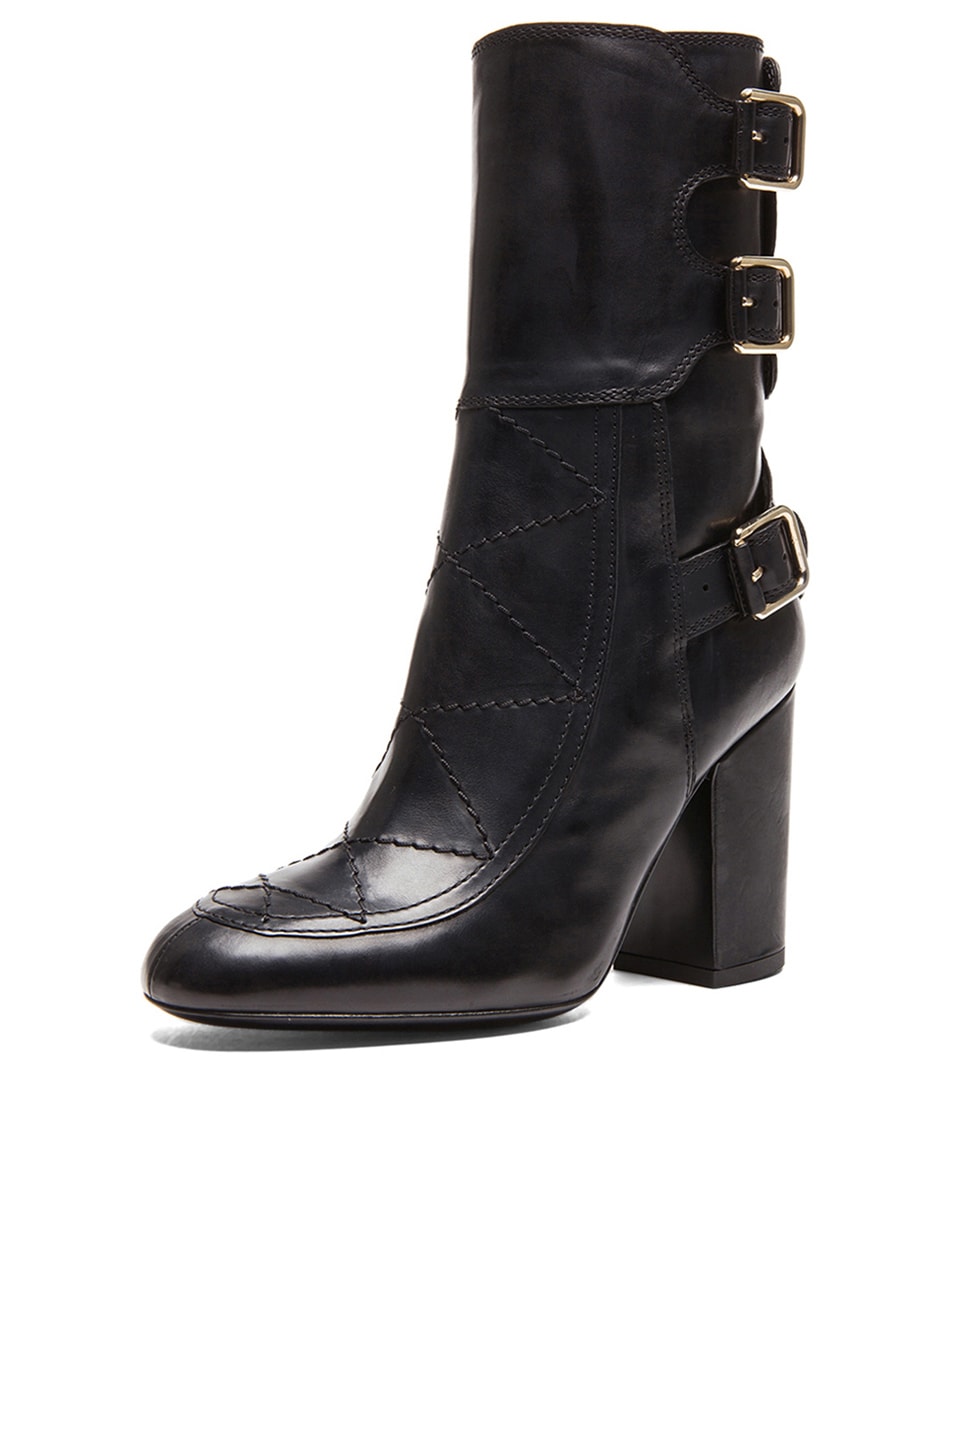 LAURENCE DACADE Merli Calfskin Leather Boots In Black Shiny Calf